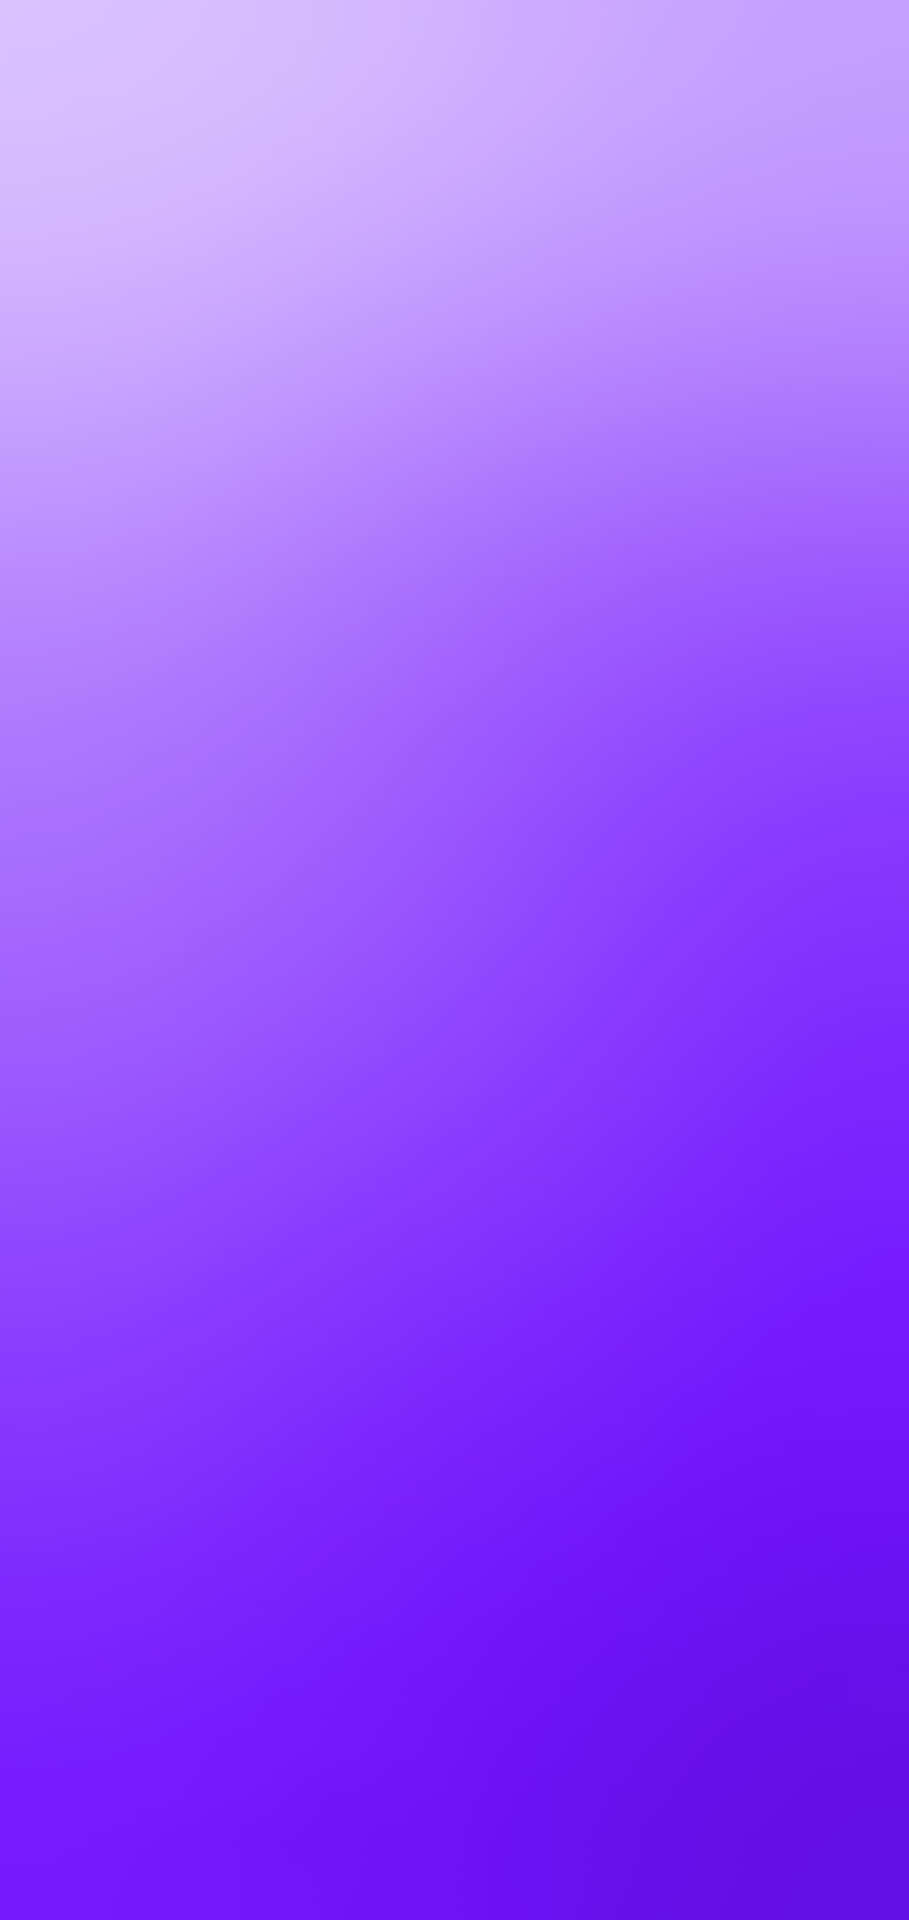 Purple And Light Blue Gradient Background